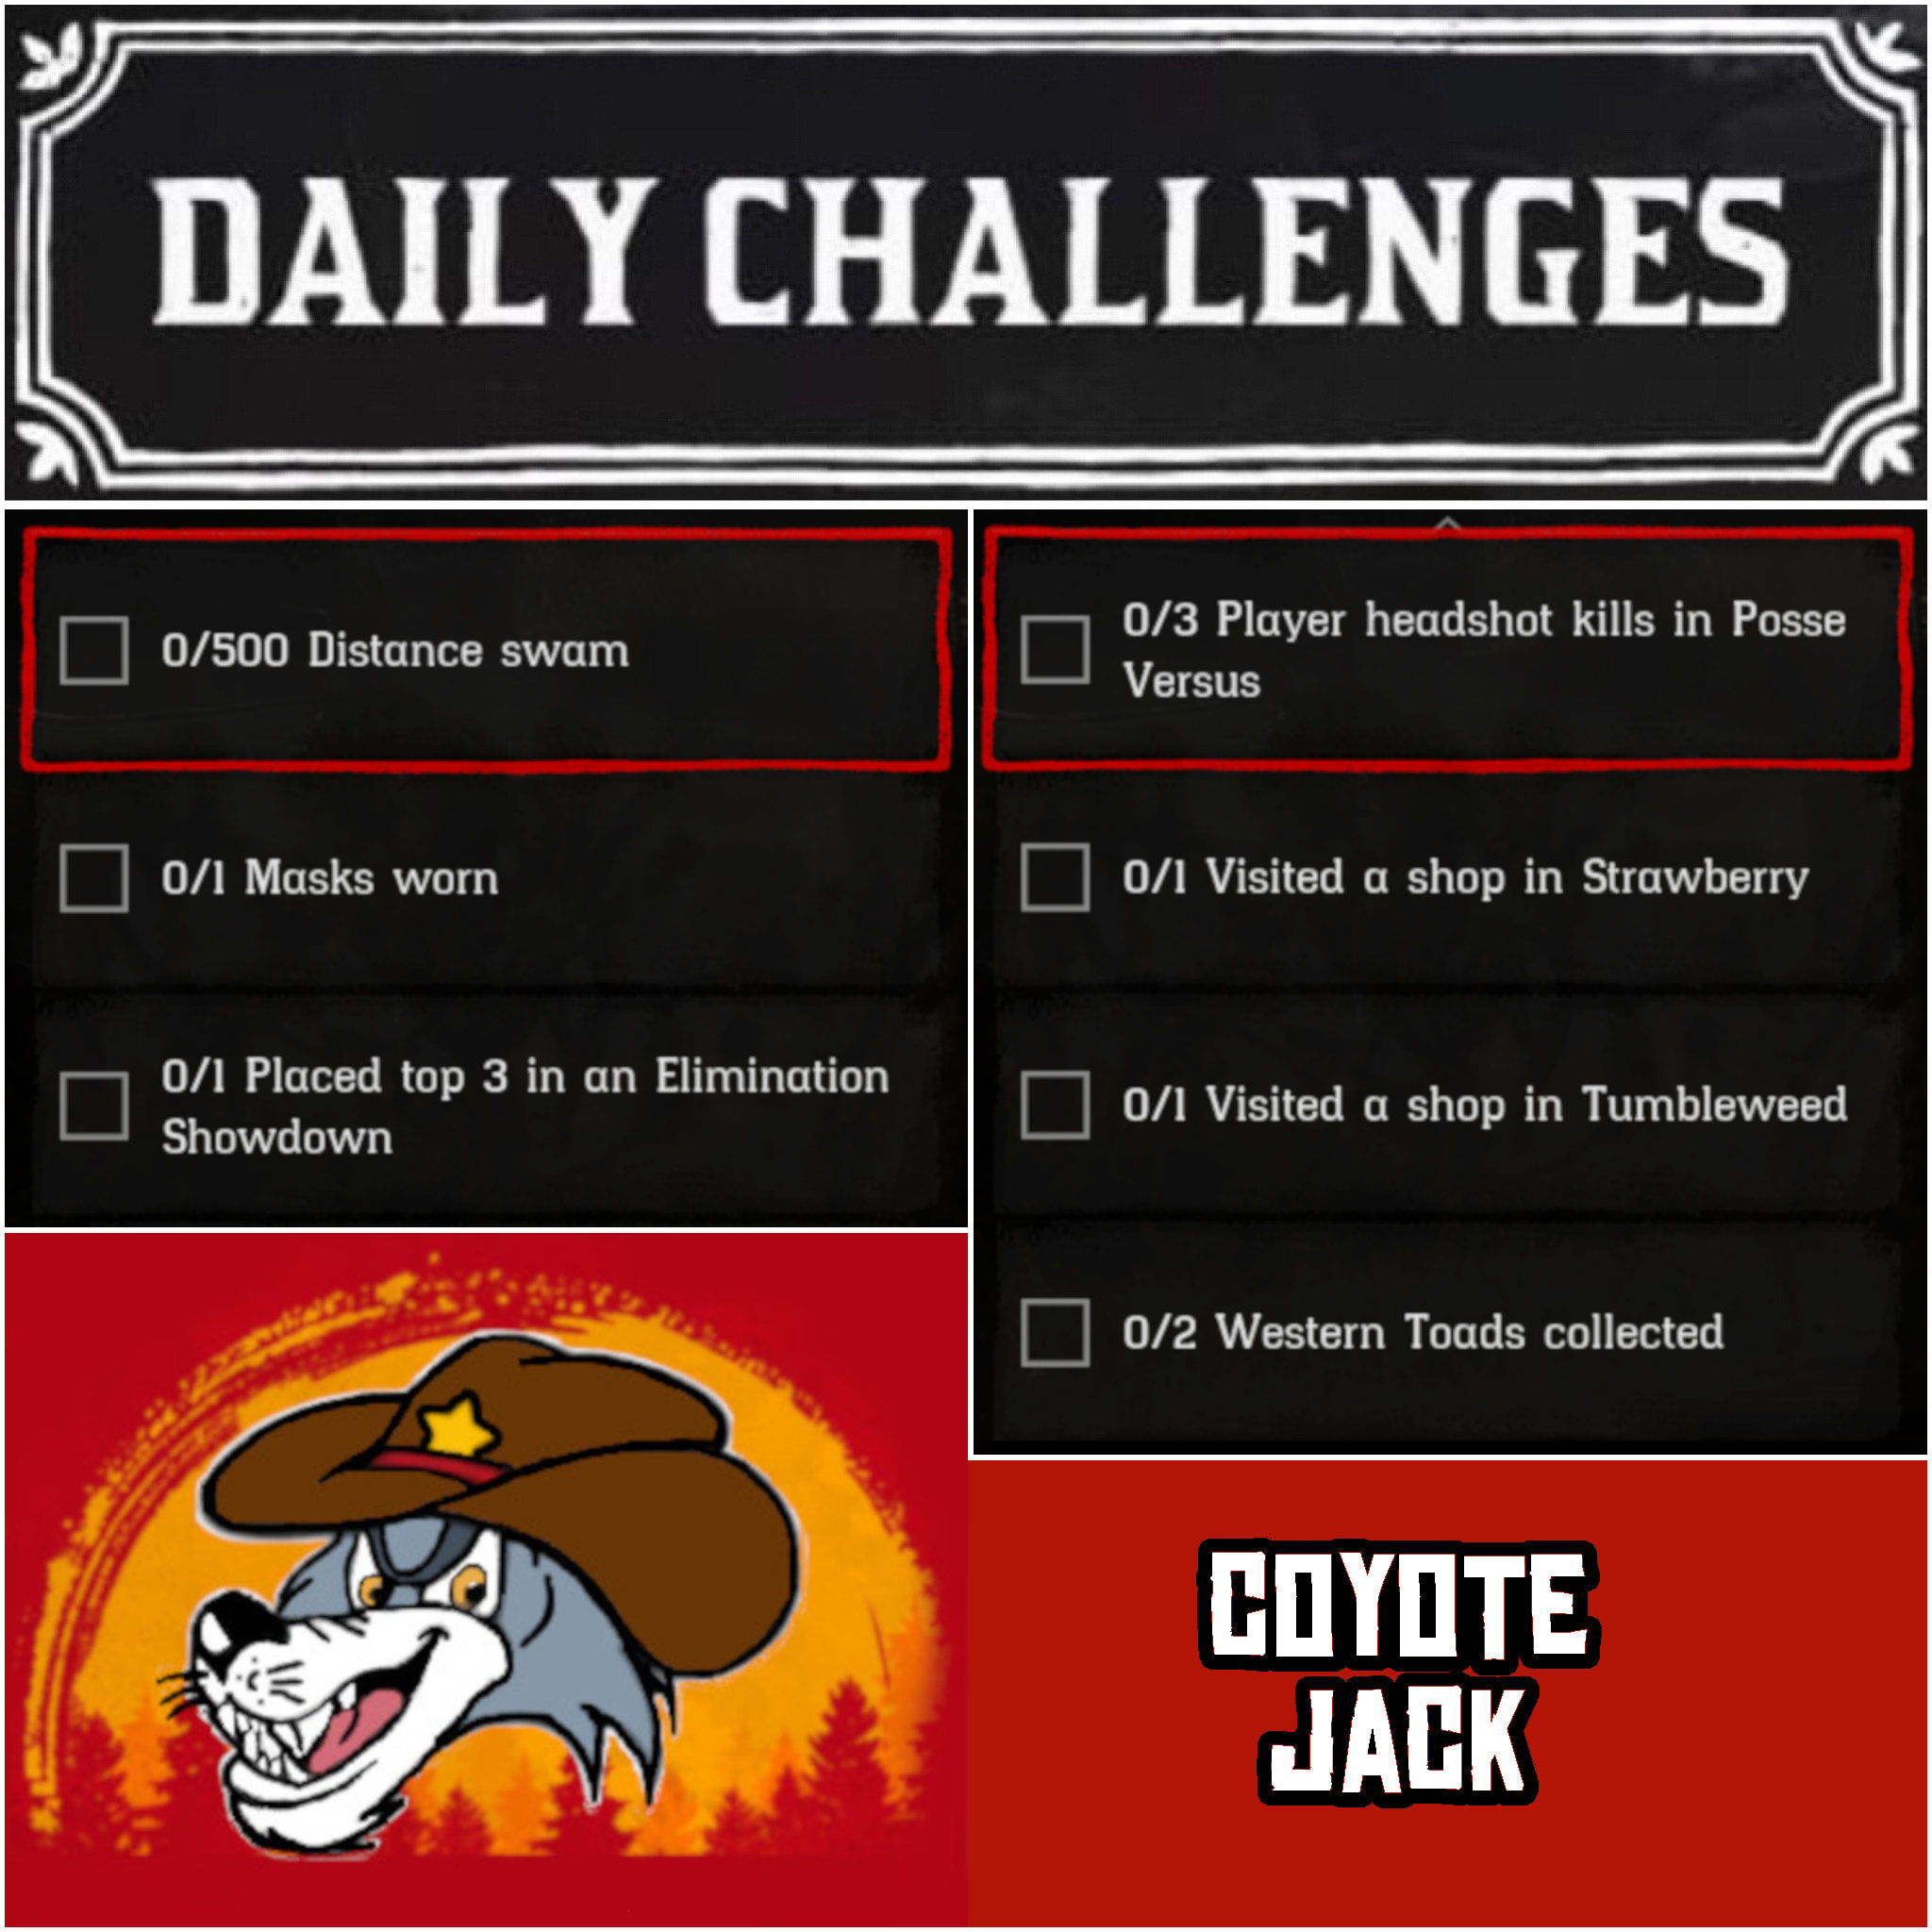 You are currently viewing Thursday 21 January Daily Challenges